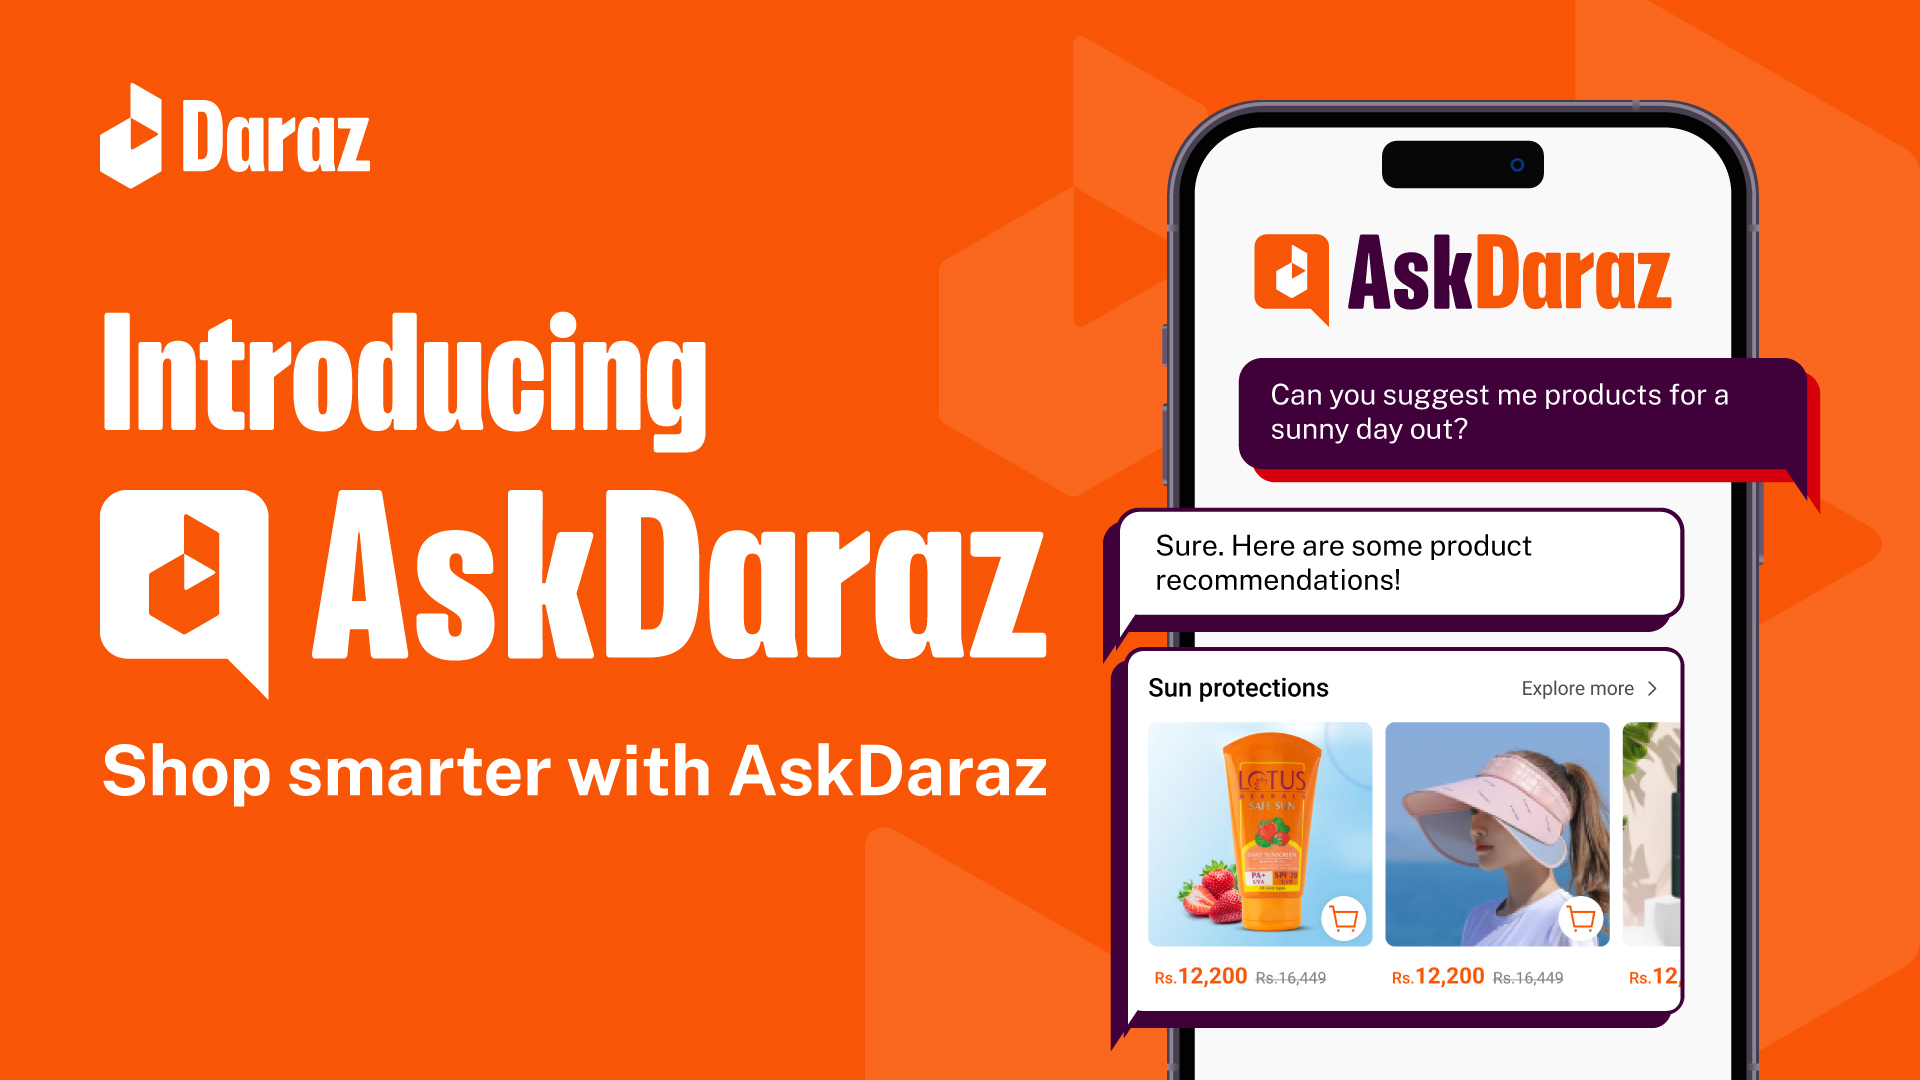 Driving innovation and growth: Daraz Group CEO shares key insights to  e-commerce in Sri Lanka